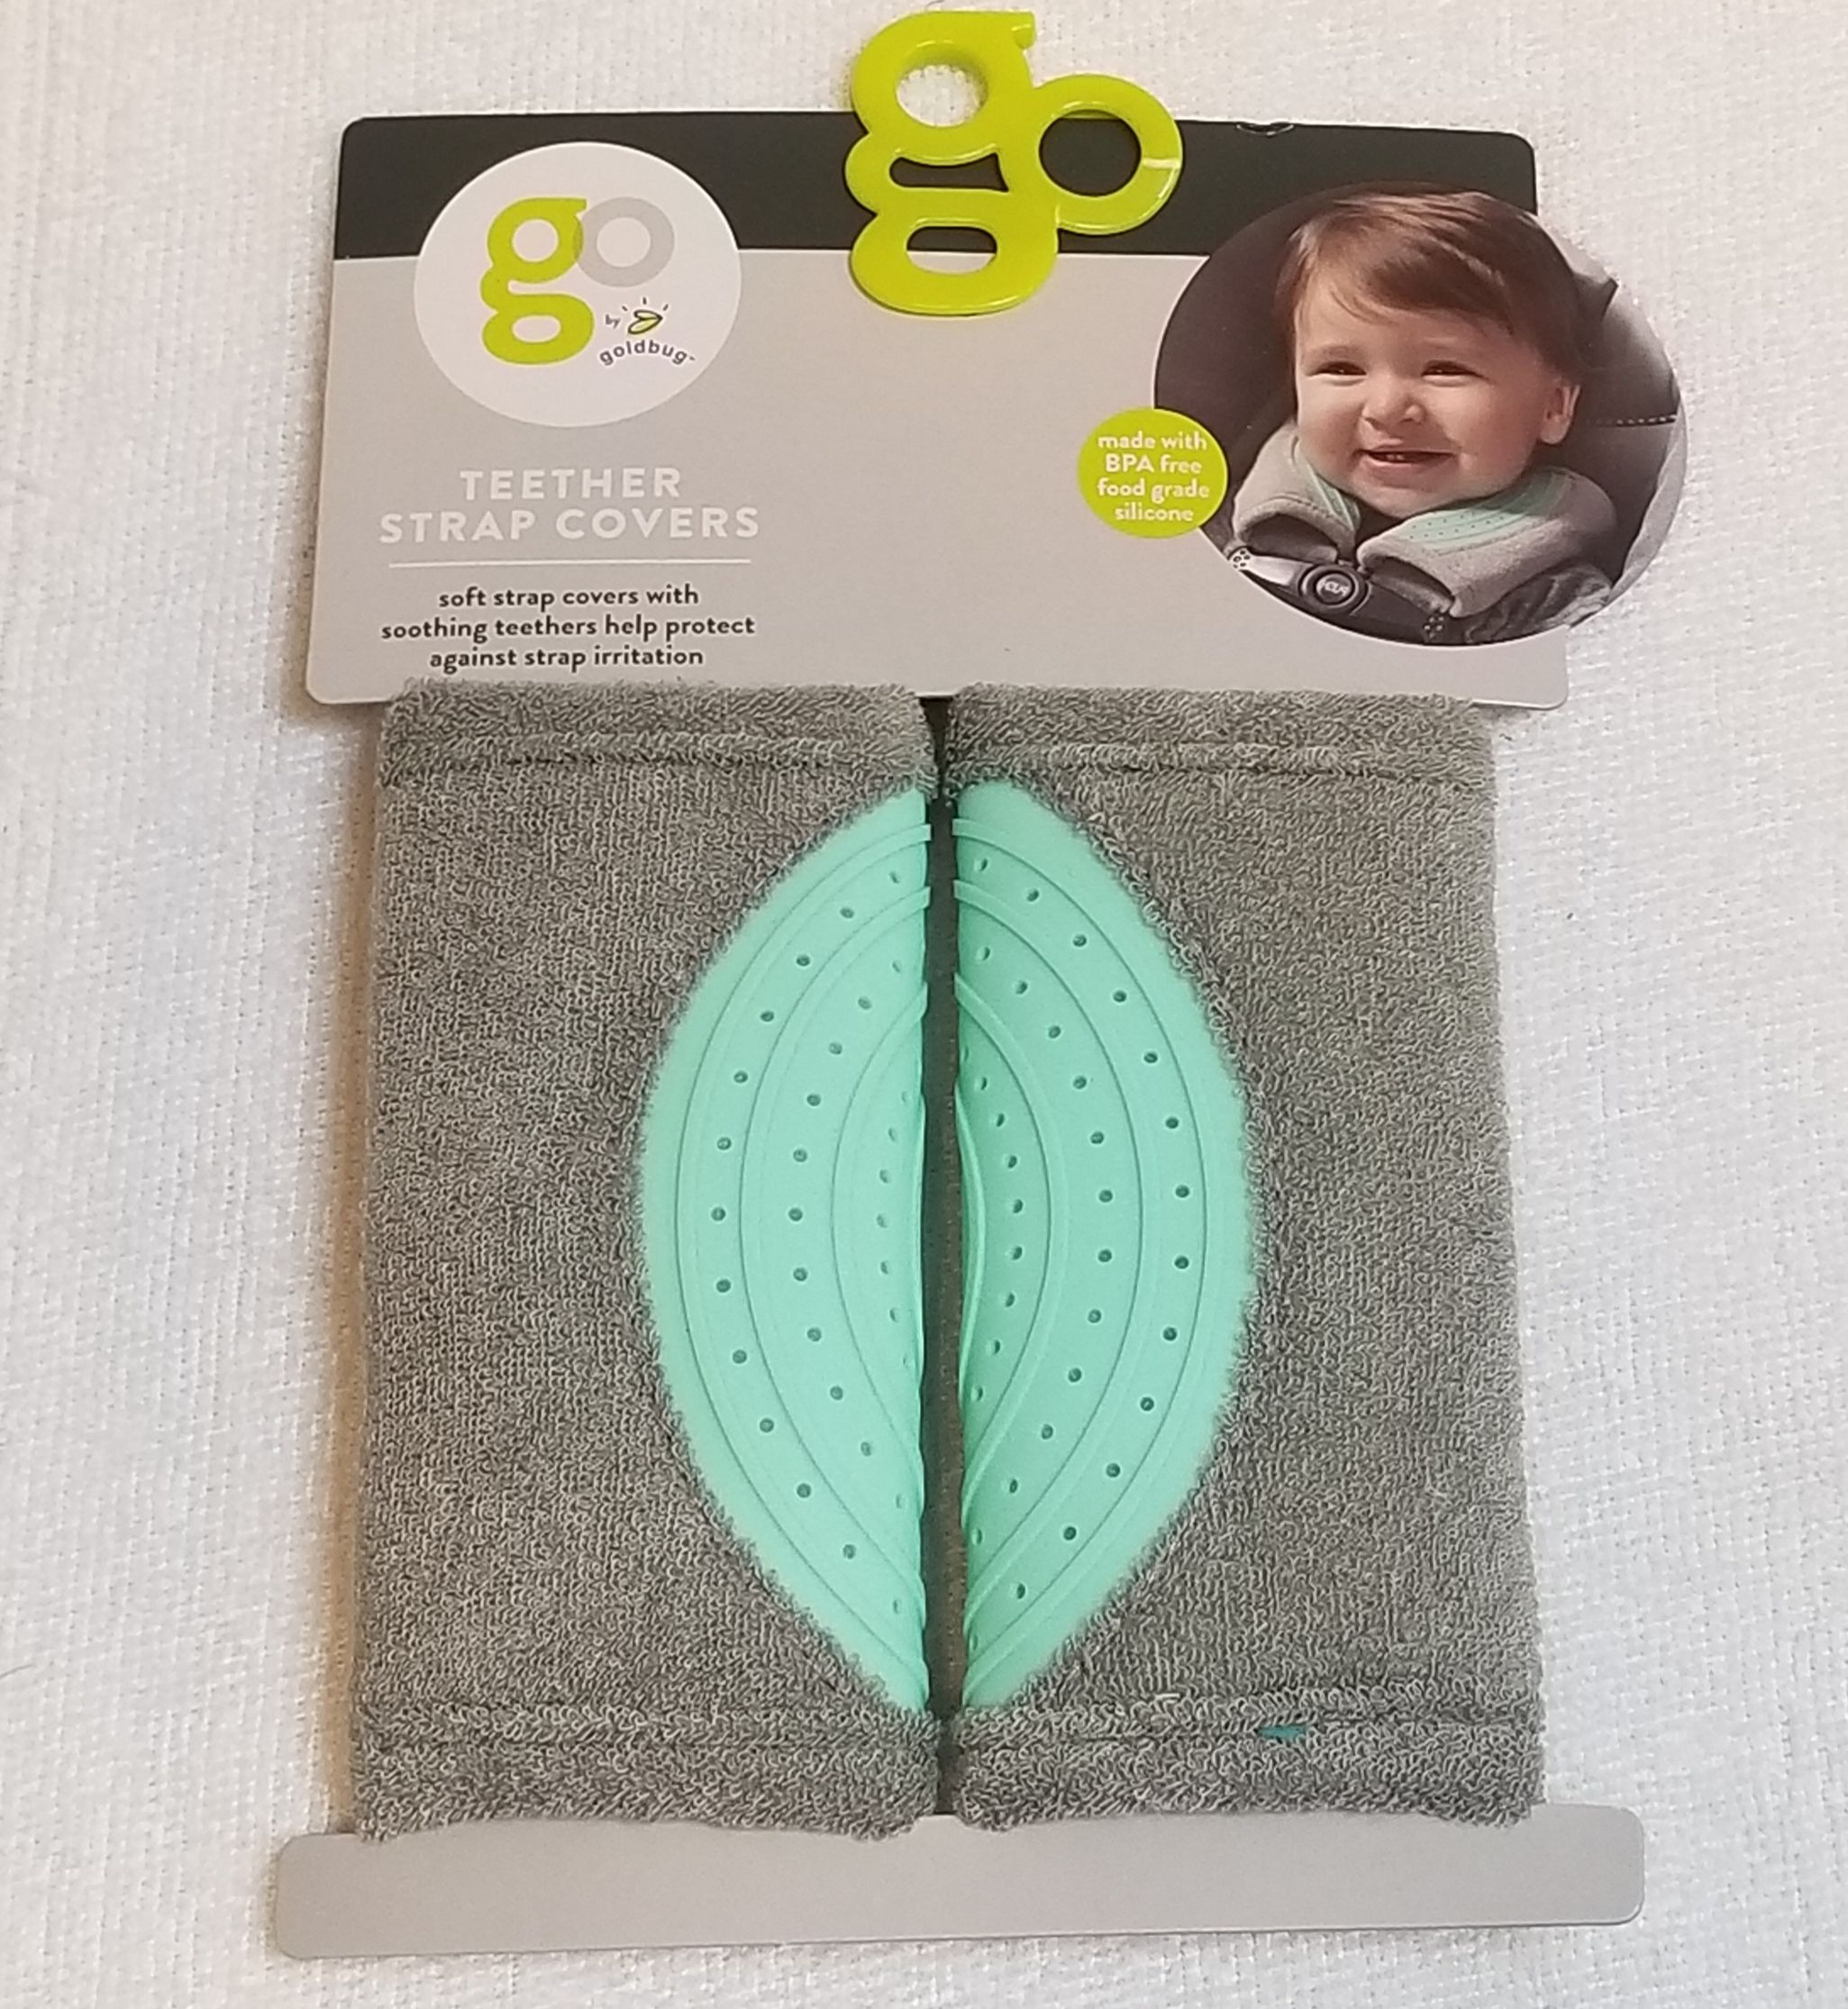 GO! TEETHER STRAP COVERS